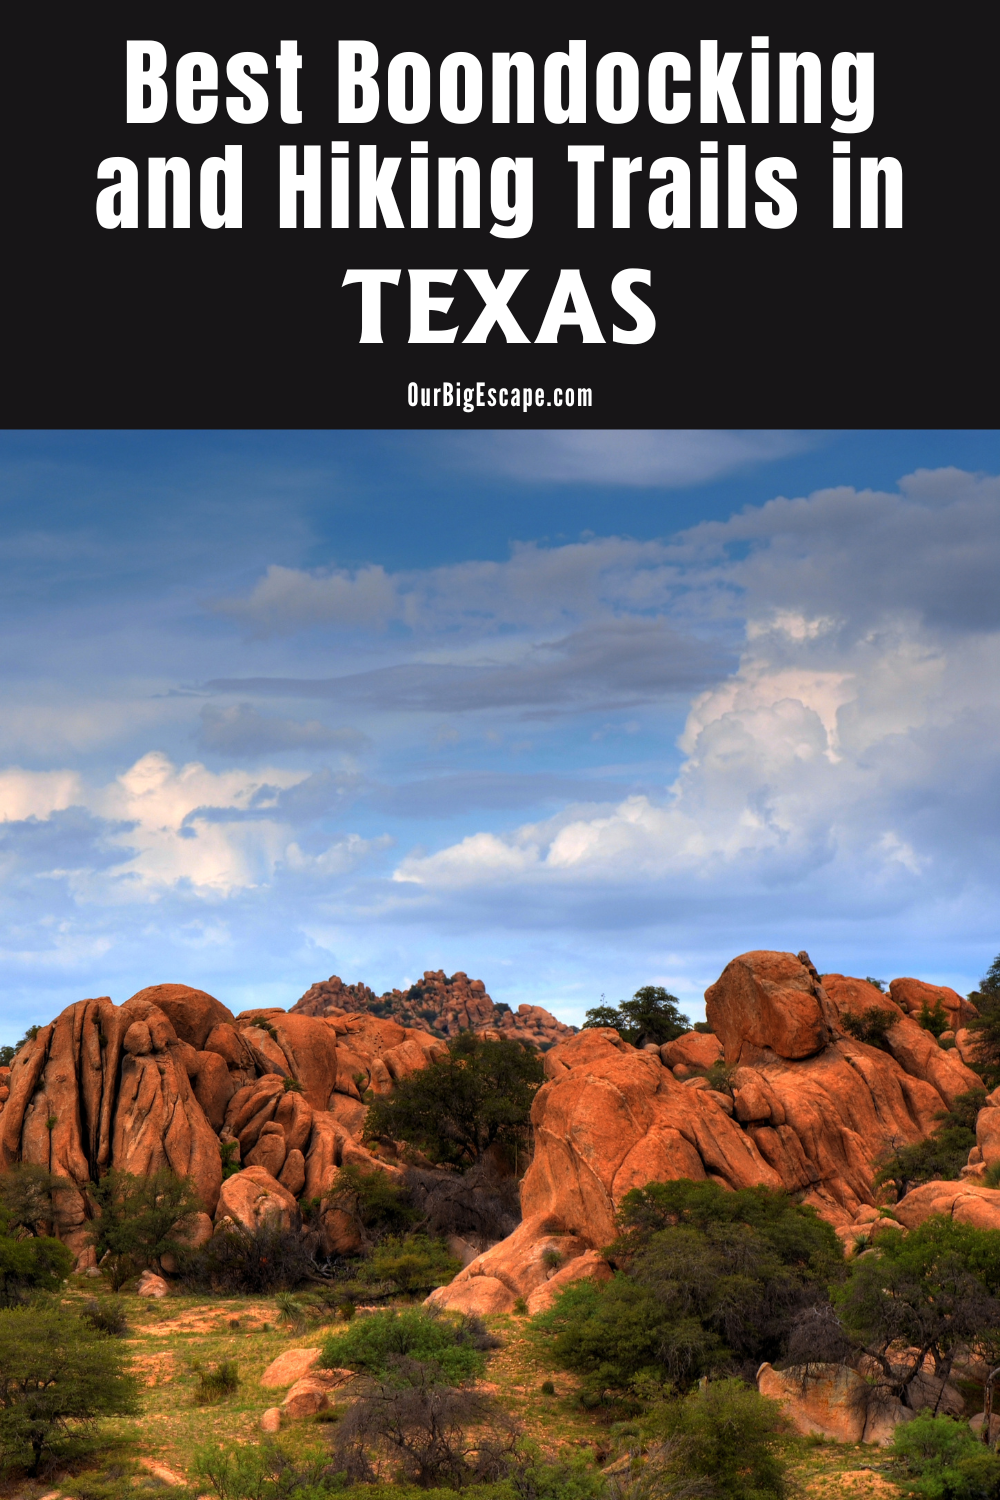 Best Boondocking and Hiking Trails in Texas